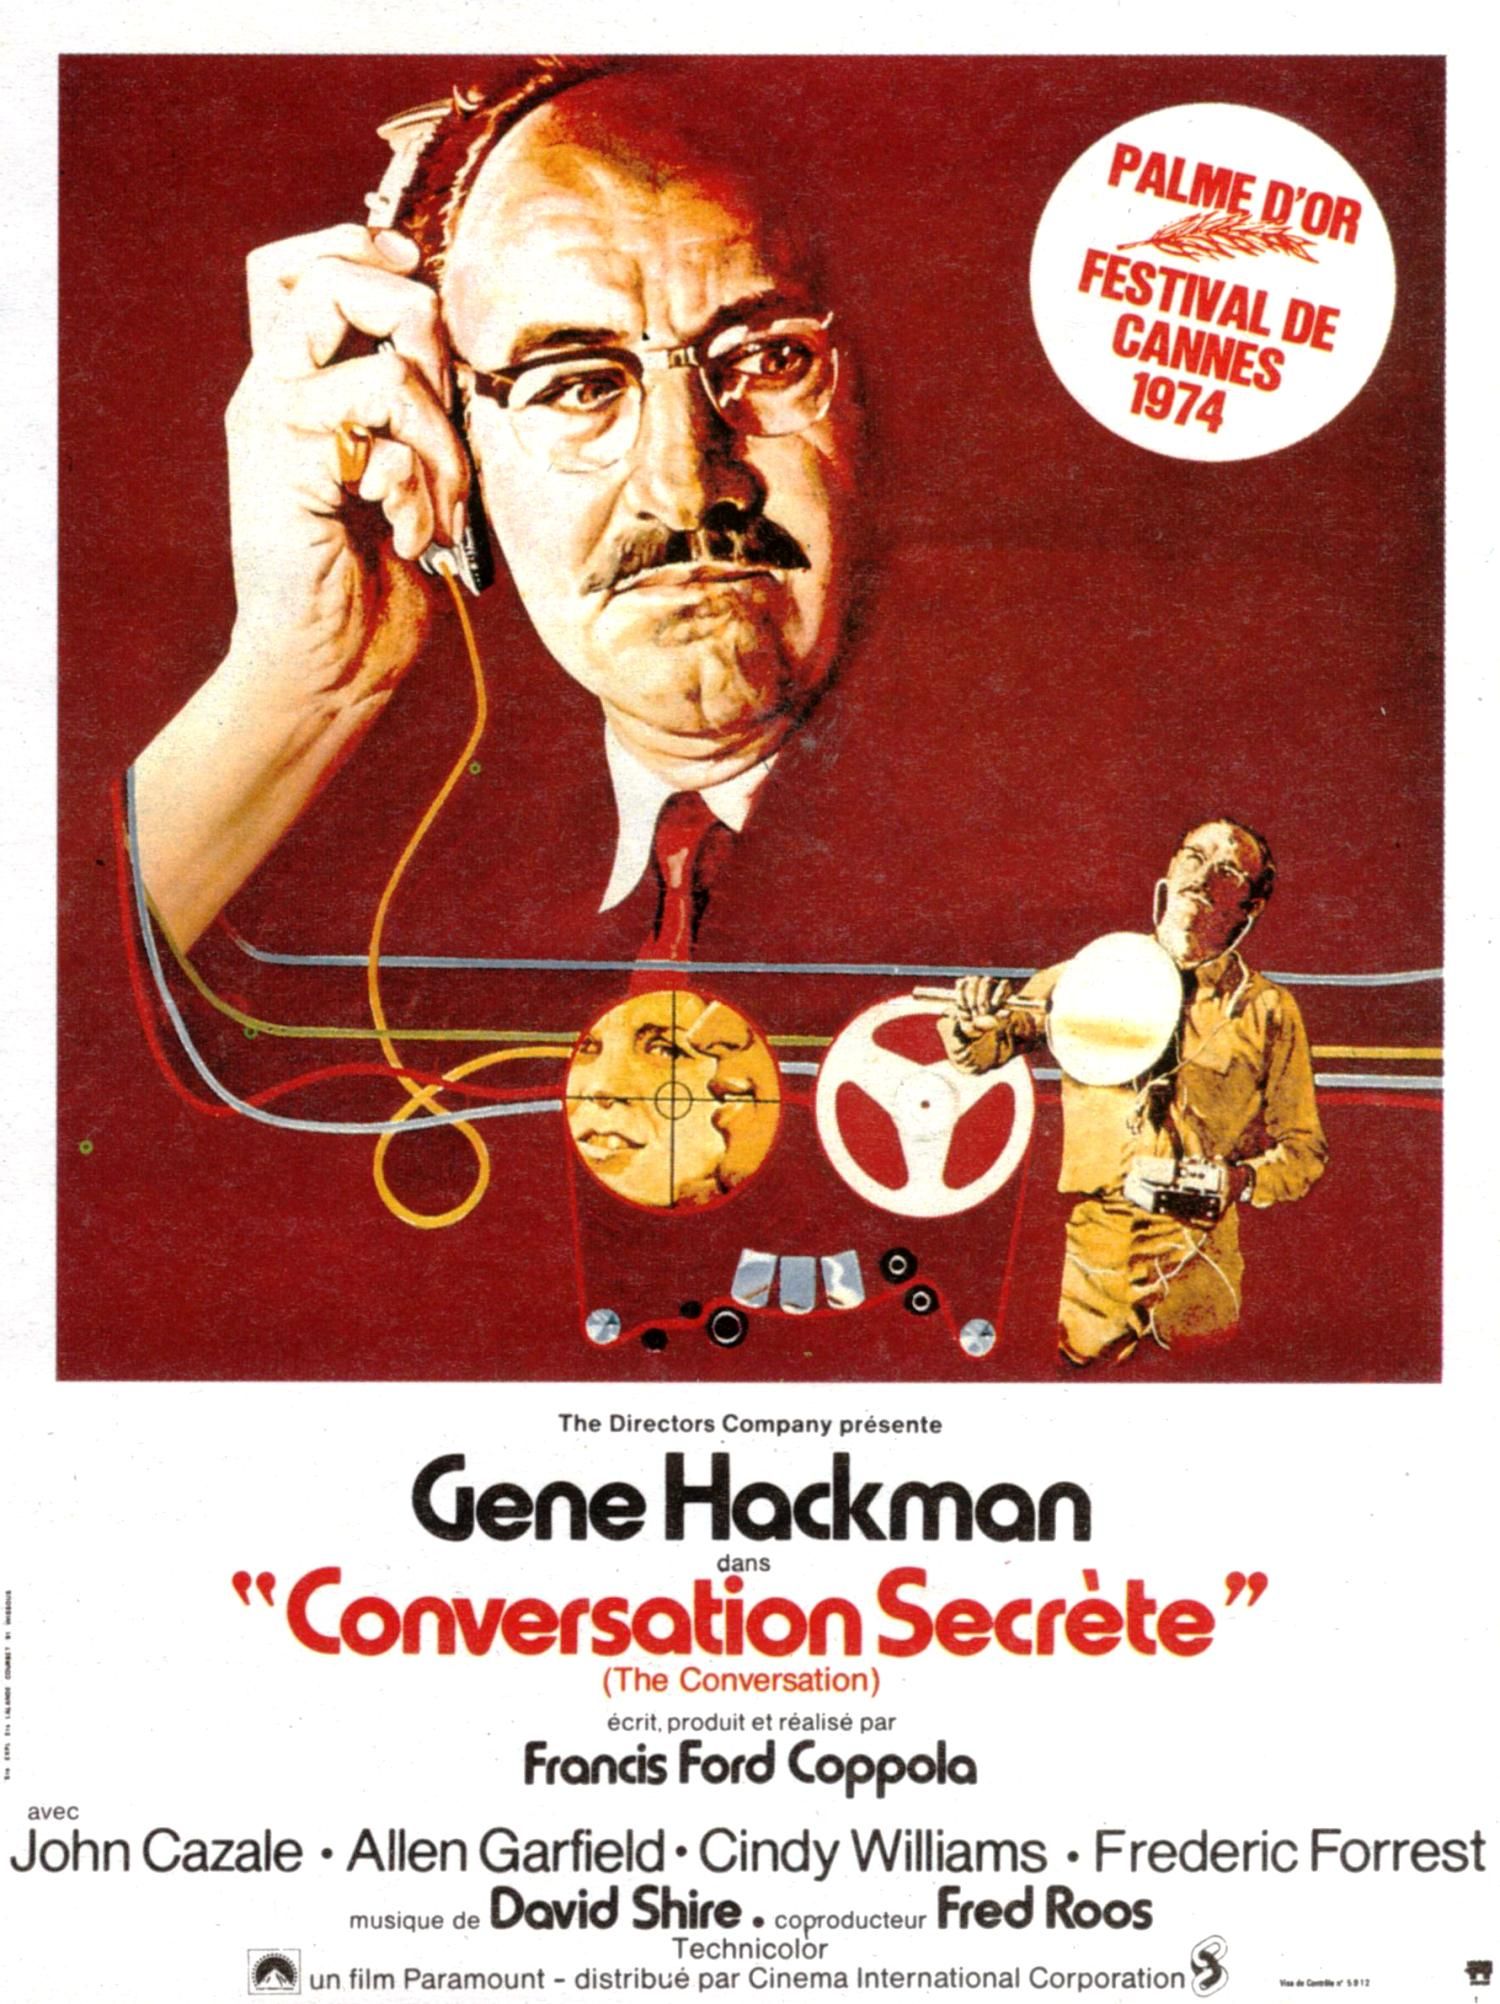 Francis ford coppola 1974 film the conversation #8